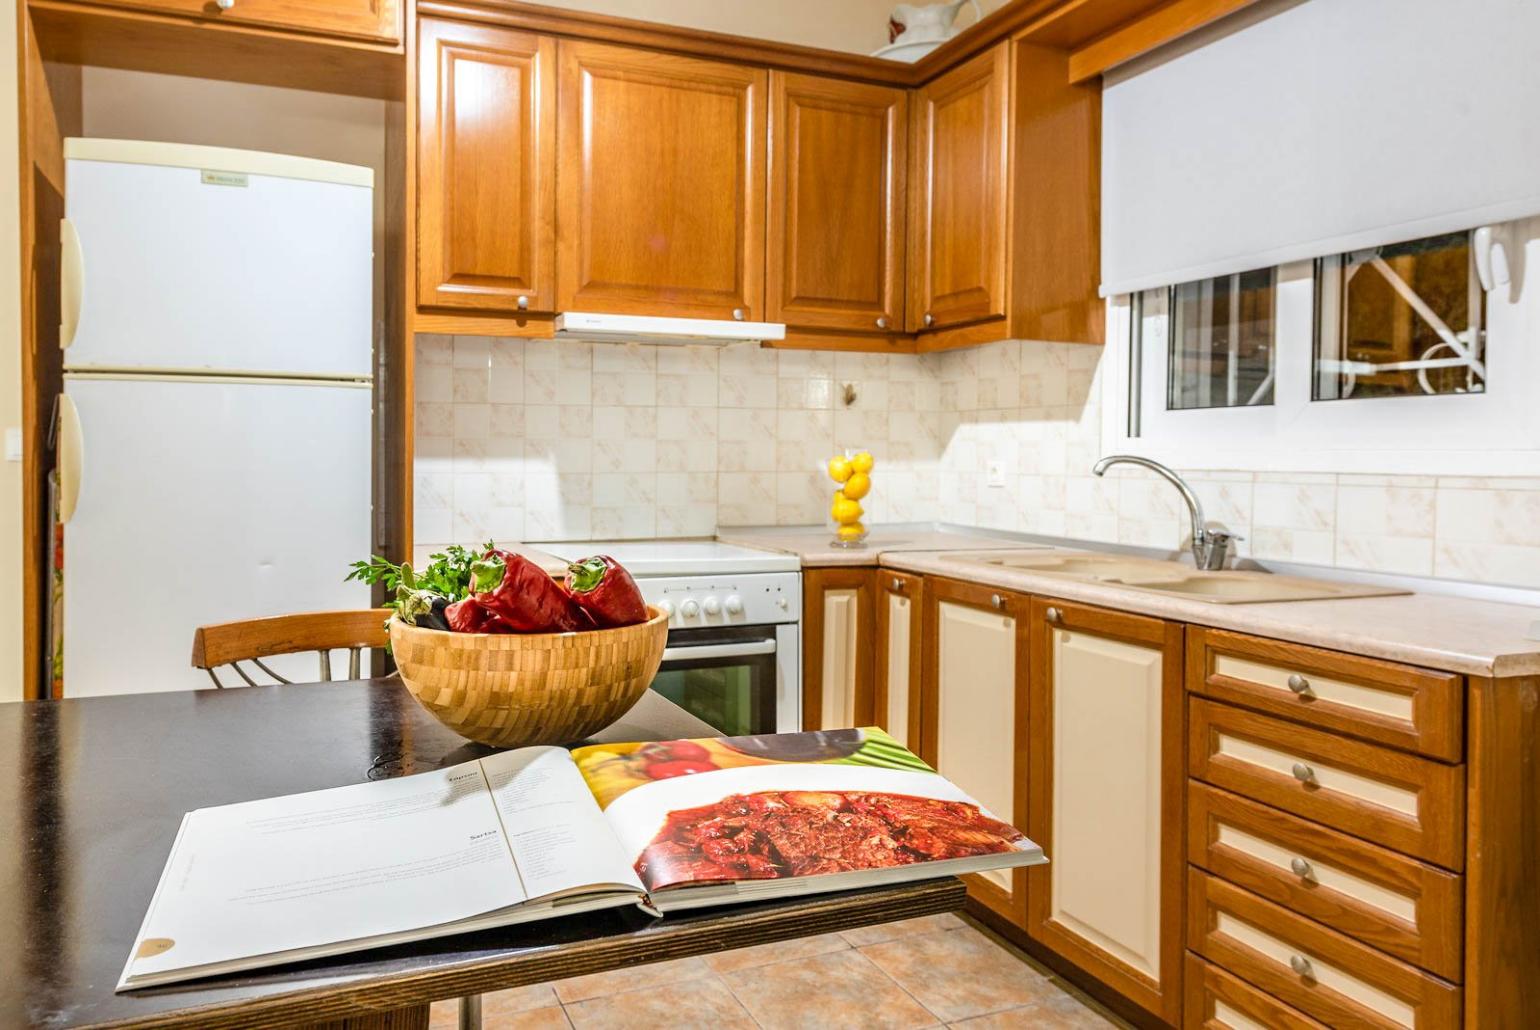 Equipped kitchen with dining table